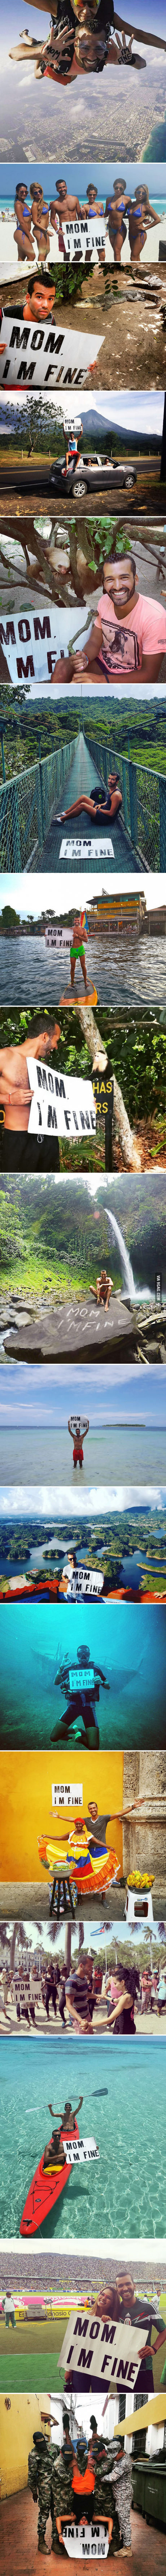 Guy Goes Traveling But Doesn’t Forget To Tell His Mom He’s OK